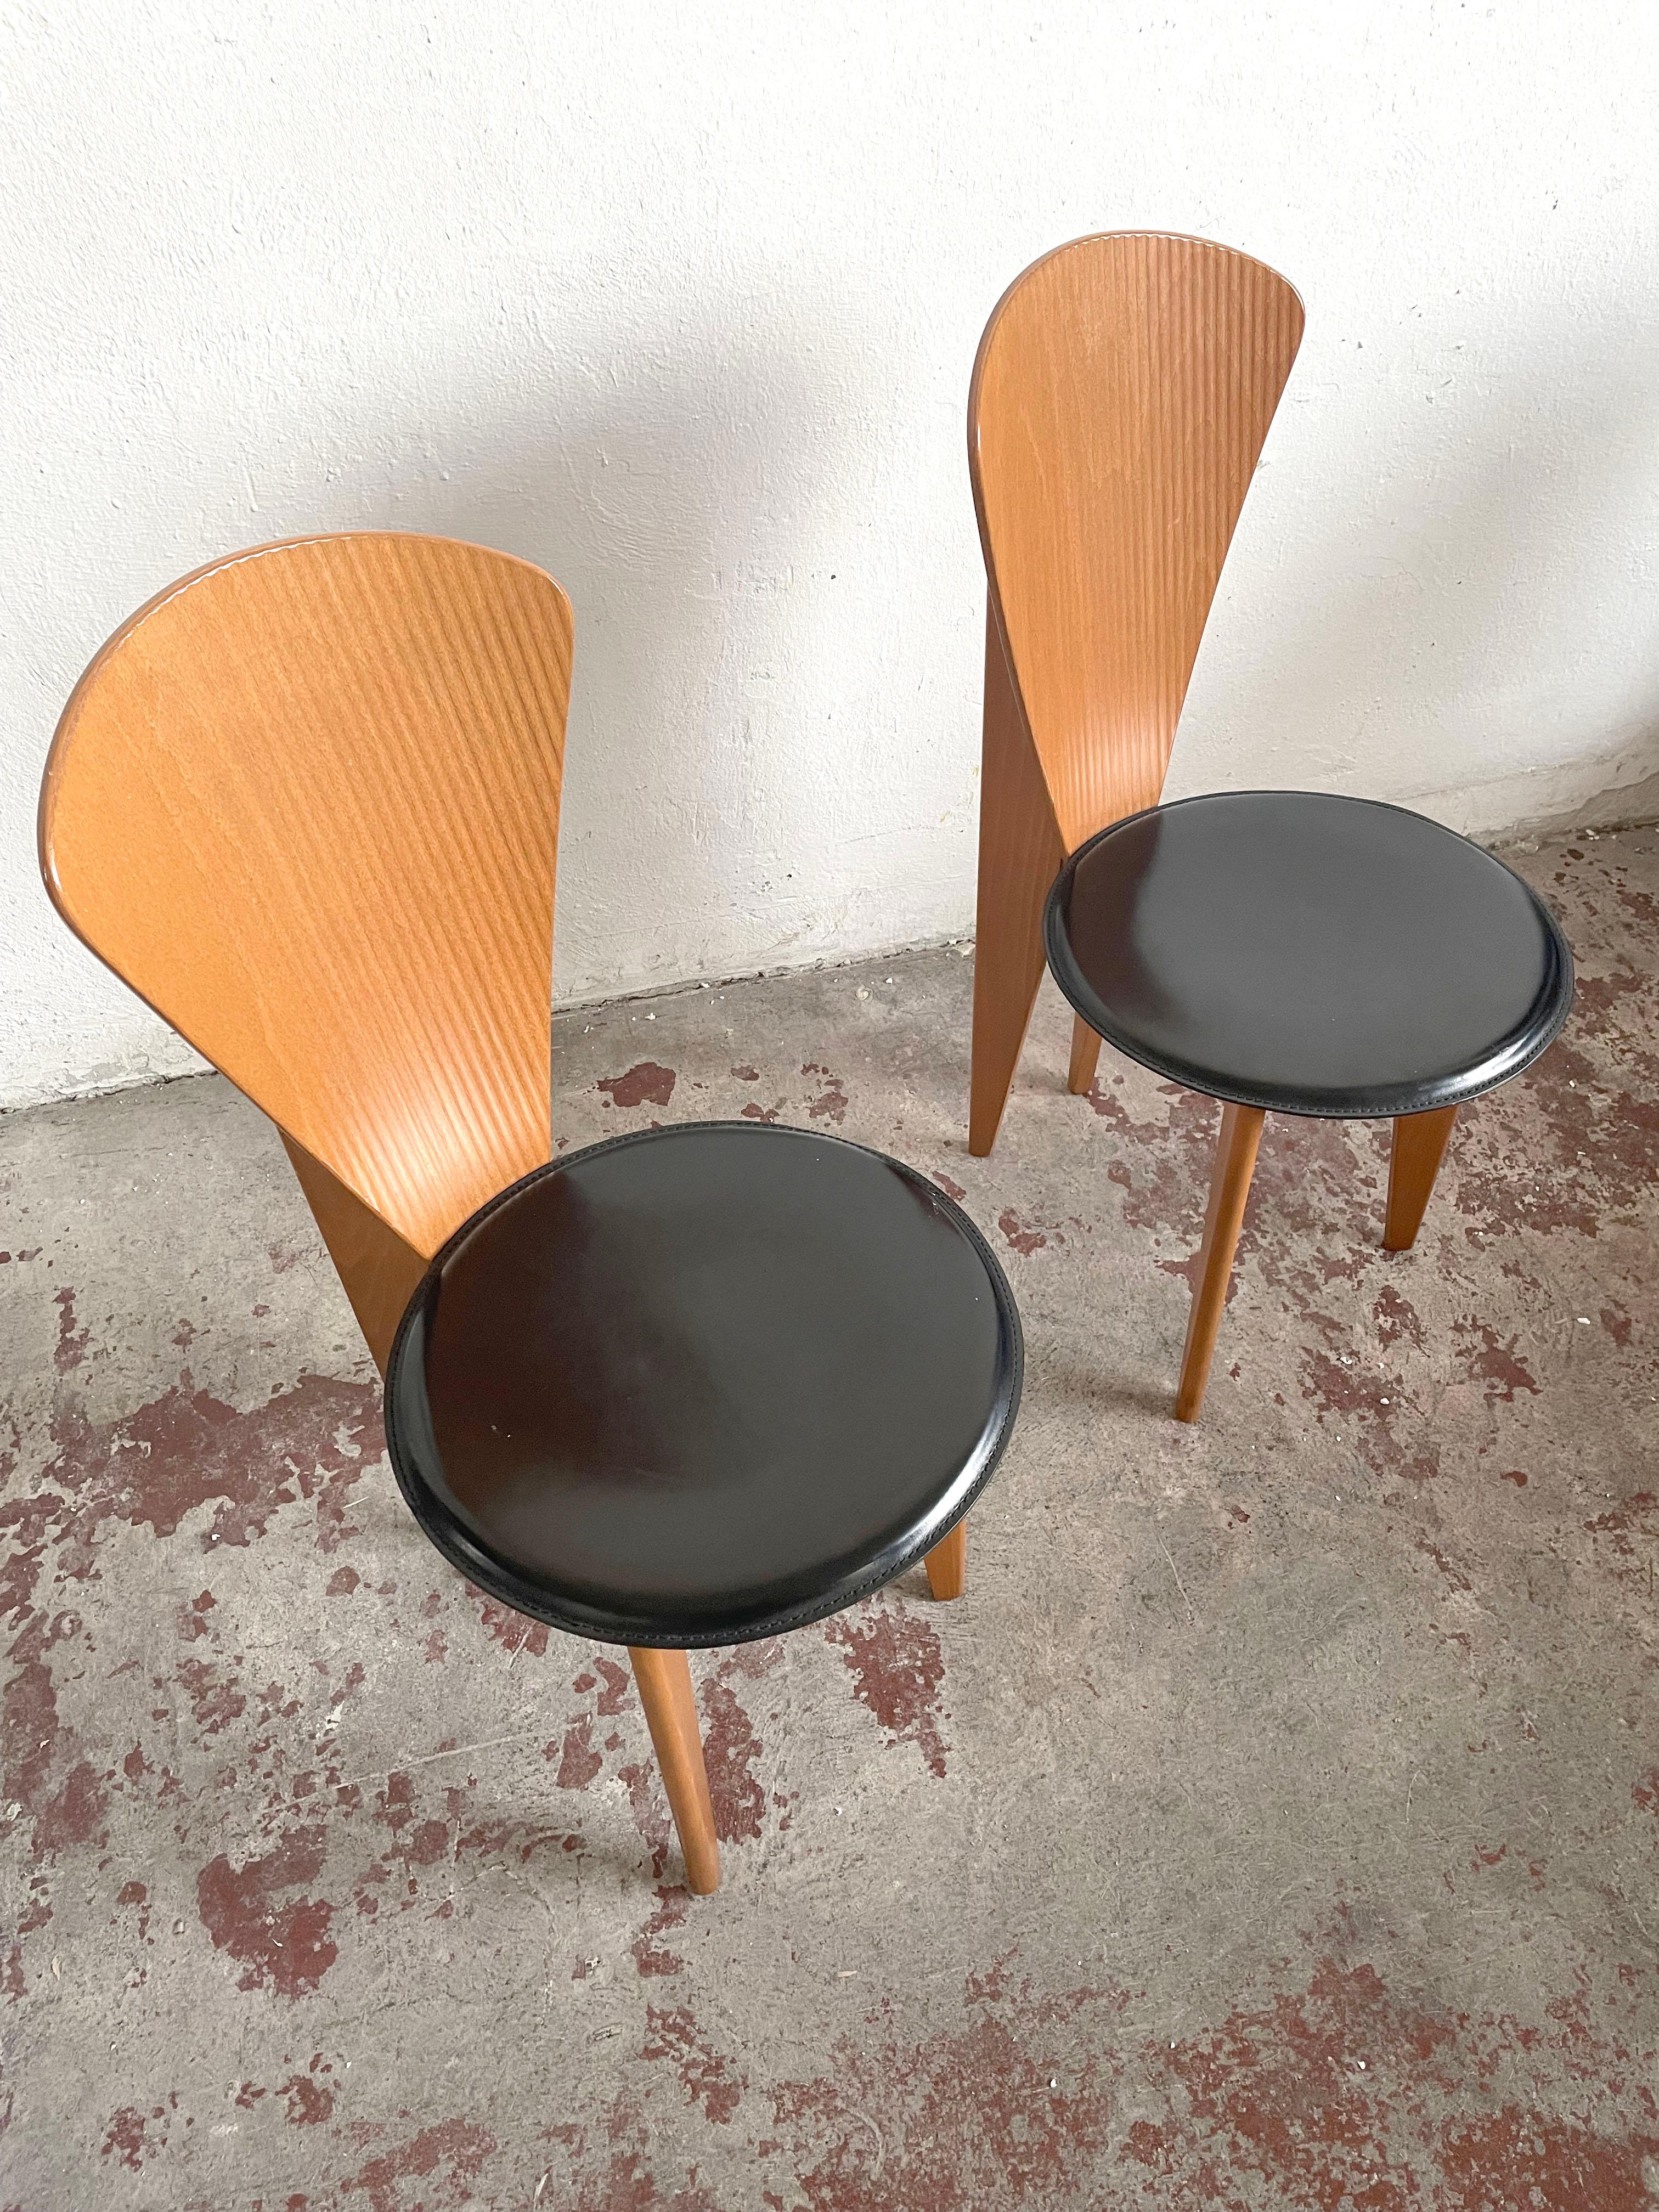 This set of two wooden dining chairs by Calligaris was made in Italy, circa 1980.

Stunning sculptural postmodern design. These dining chairs feature a curved back with ridges and round leather seats.

There are no structural issues. The leather